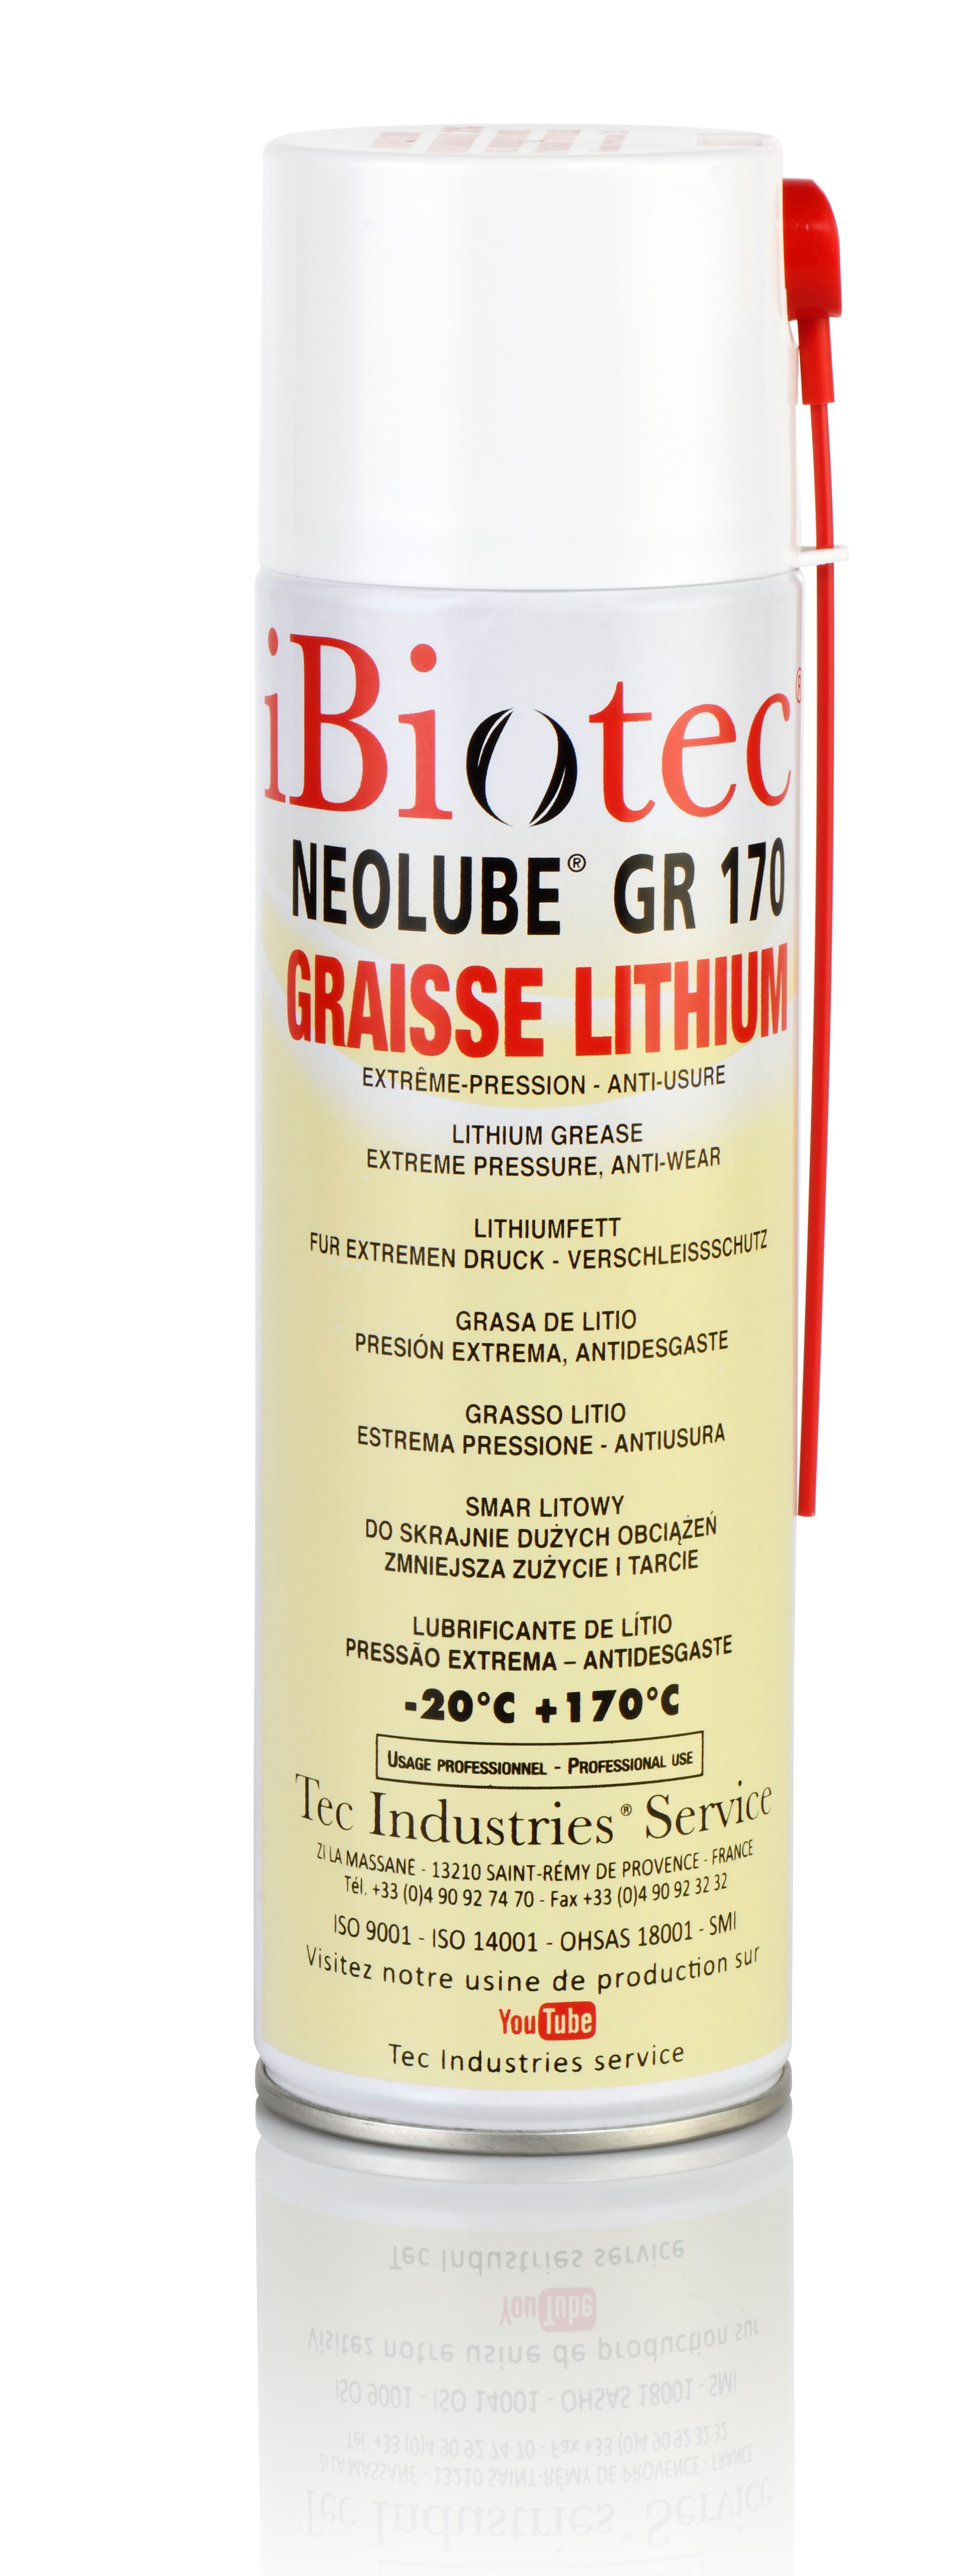 Lithium grease, multipurpose grease, high pressure lithium grease, lithium grease spray, multipurpose grease spray, greases for industries, technical grease, polymer lithium grease, adhesive, multi-service, multi-purpose, extreme pressure, anti-wear, anti-corrosion, excellent stability in damp environments. general lubrication in mechanical and maintenance environments. technical grease suppliers, industrial grease suppliers, industrial lubricant suppliers, industrial lubricant manufacturers, industrial grease manufacturers, technical grease manufacturers, multi-purpose grease aerosol, multi-service grease aerosol, lithium grease aerosol, lithium grease spray, lithium grease cartridge, multi-purpose grease cartridge, multi-service grease cartridge, agricultural grease cartridge, universal grease cartridge, ep2 grease cartridge, adhesive grease, light-coloured grease, industrial grease, lithium grease, multi-purpose lithium grease, multi-use grease, multi-purpose grease, multi-tp grease, mechanical grease, bearing grease, lithium cardan grease, compare lithium grease